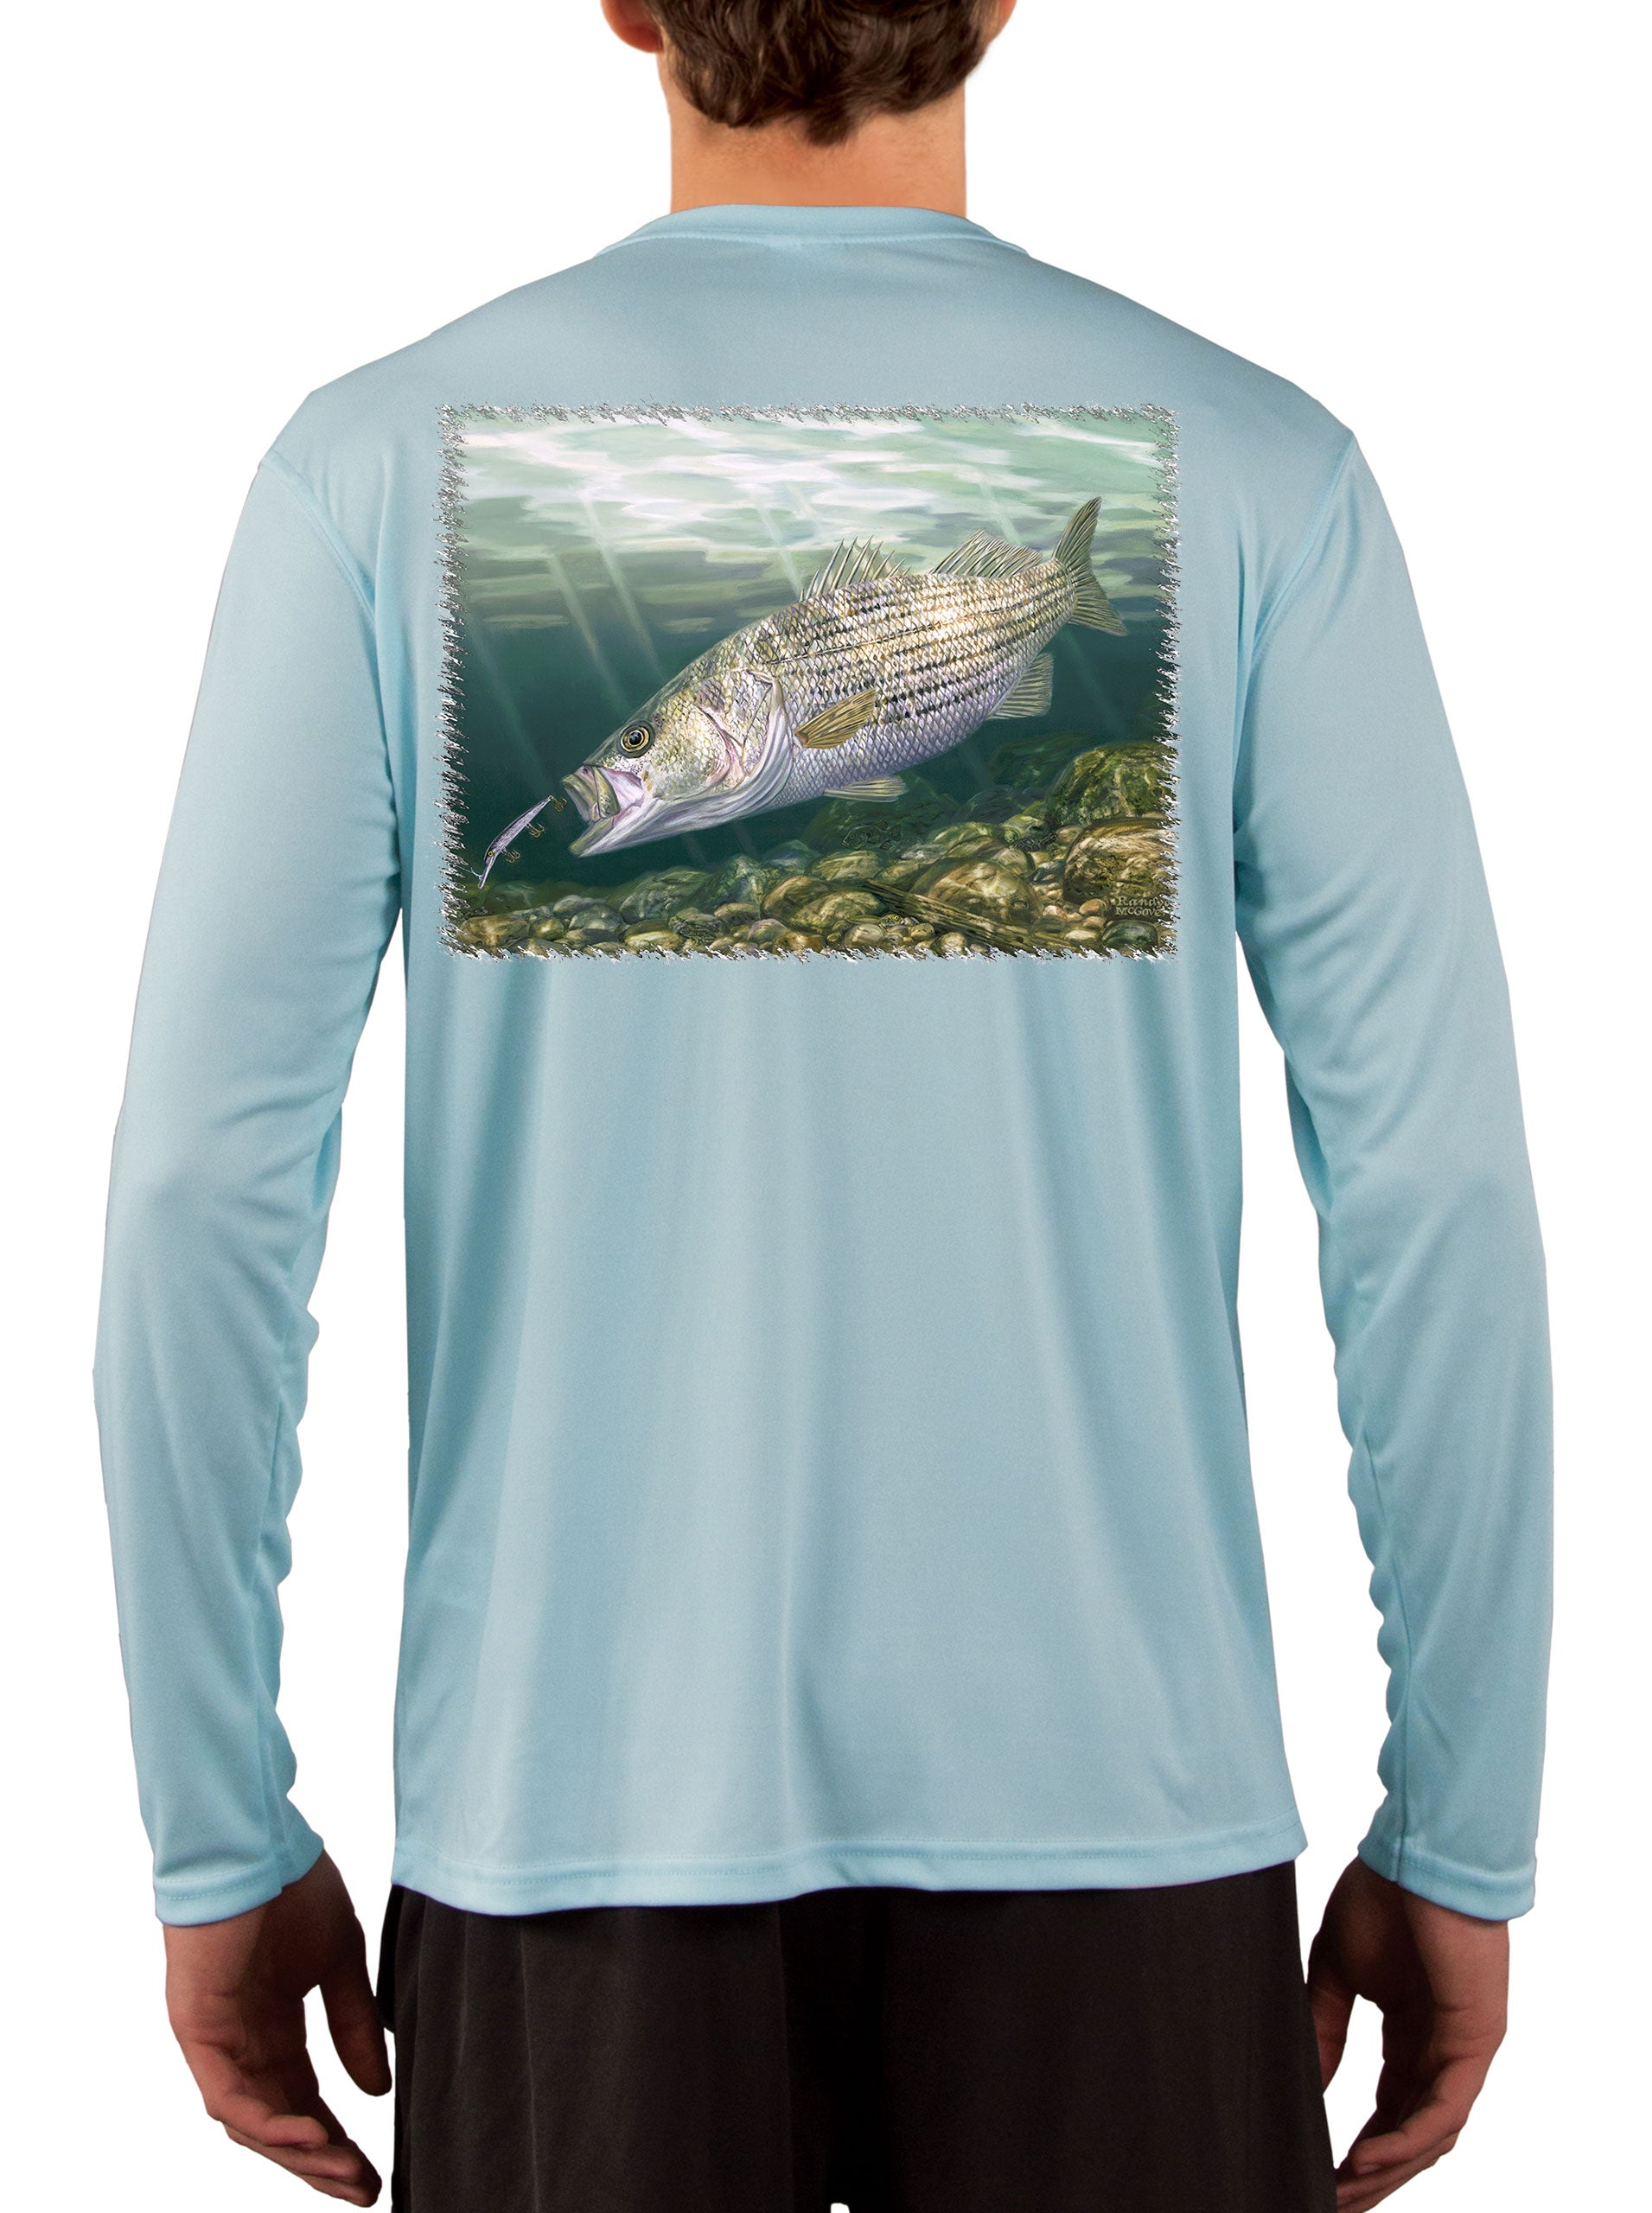 [New] Striper Fishing Shirts for Men with Striped Bass Fish Artwork 4XL / Ice Blue